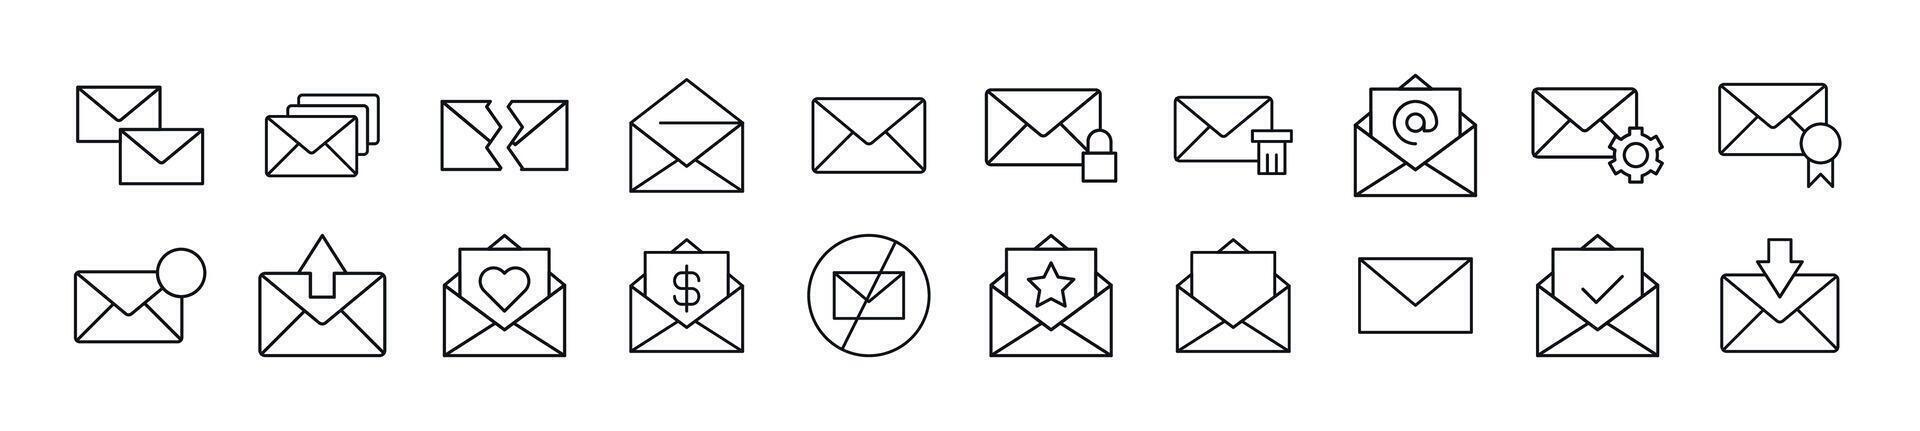 Set of line icons of envelope. Editable stroke. Simple outline sign for web sites, newspapers, articles book vector